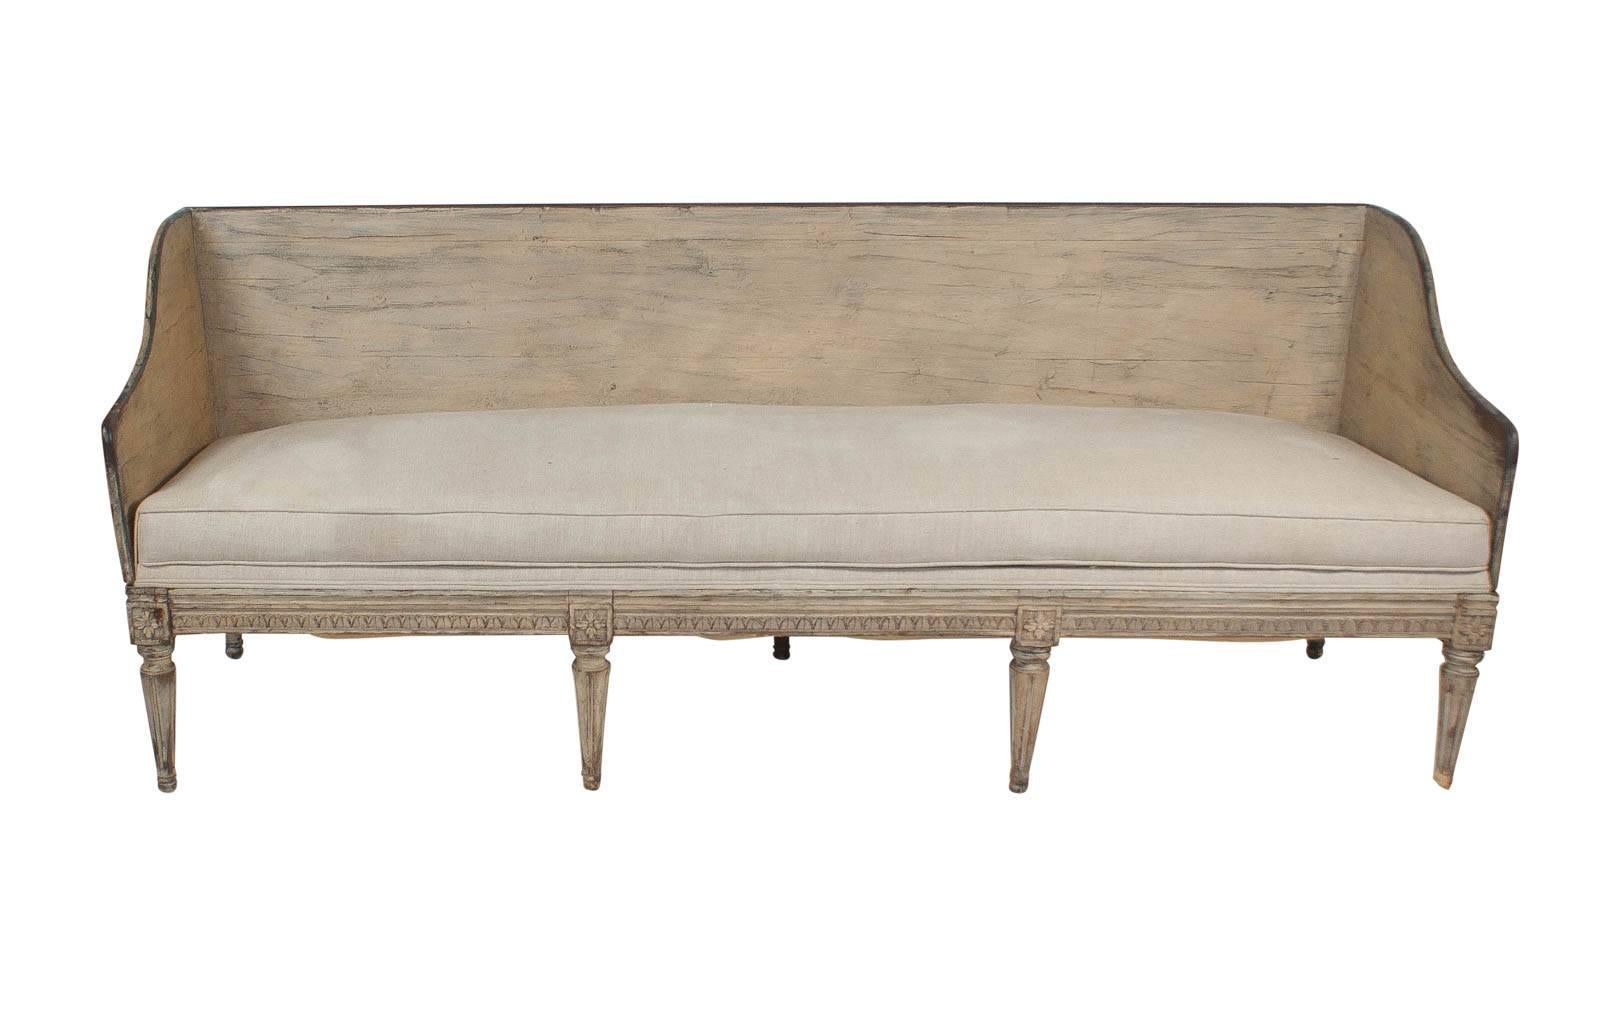 A Swedish Gustavian painted sofa, circa 1780, in worn gray blue paint that appears to be original. This design is a rarely seen and this sofa is actually comfortable. This piece was collected in Europe approximately 20 years ago. The upholstery was